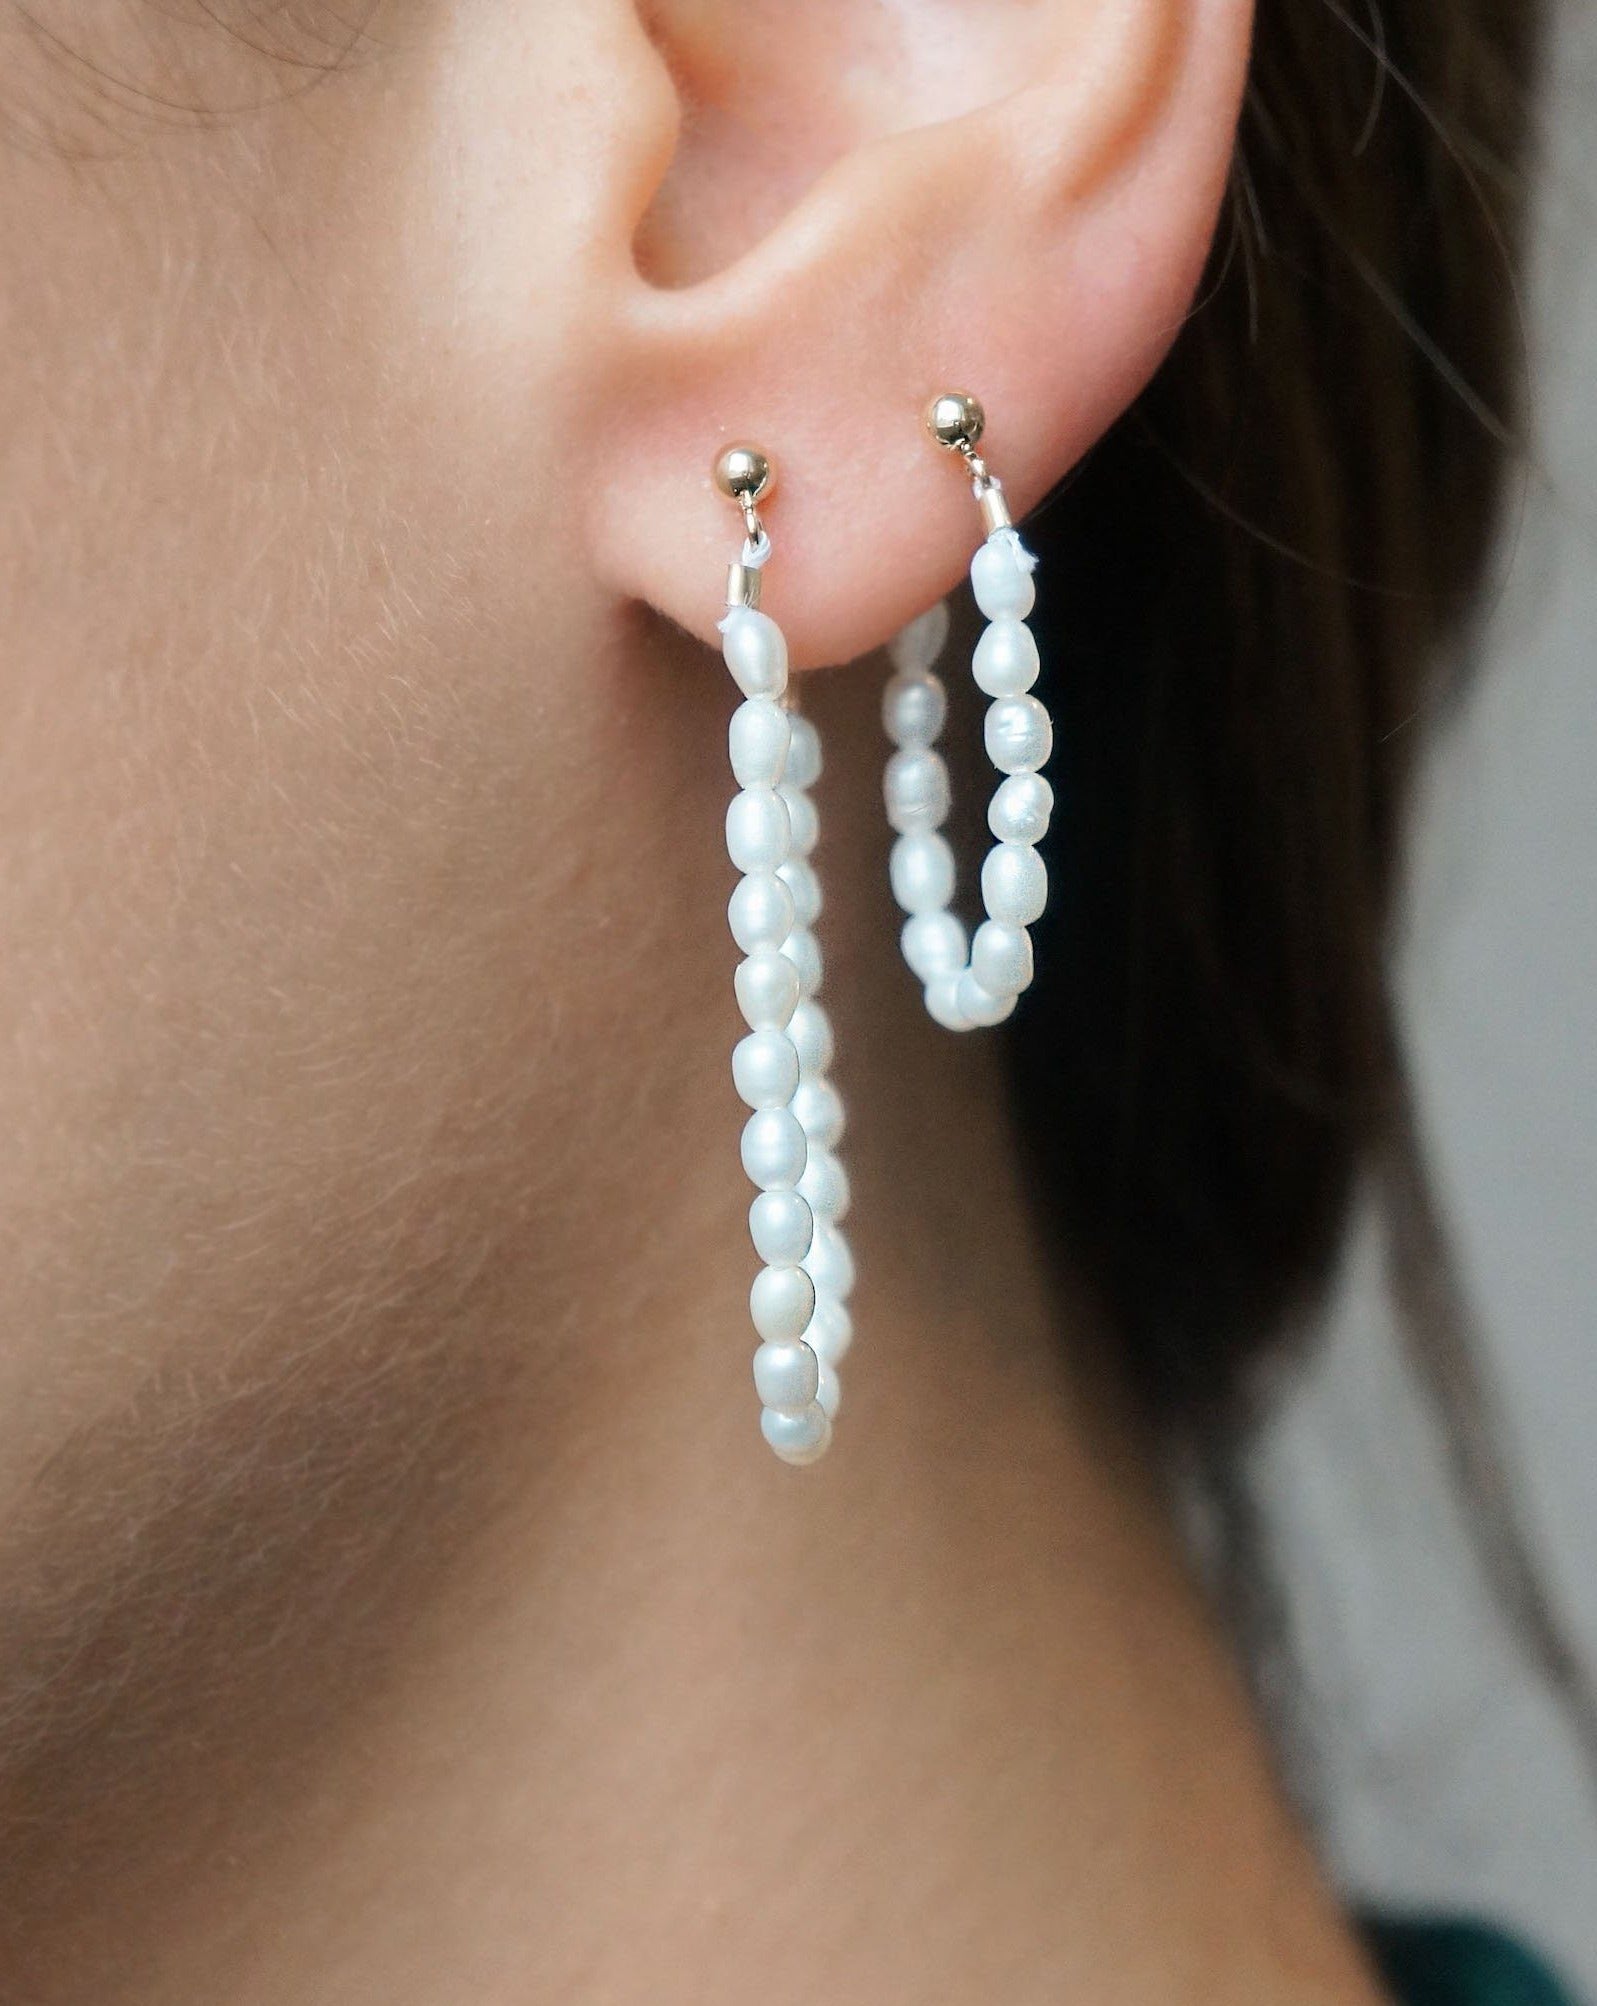 Nube Earring by KOZAKH. 3mm ball earring stud, crafted in 14K Gold Filled, featuring a 1 1/2 inch drop length of 3mm white Rice Pearls.